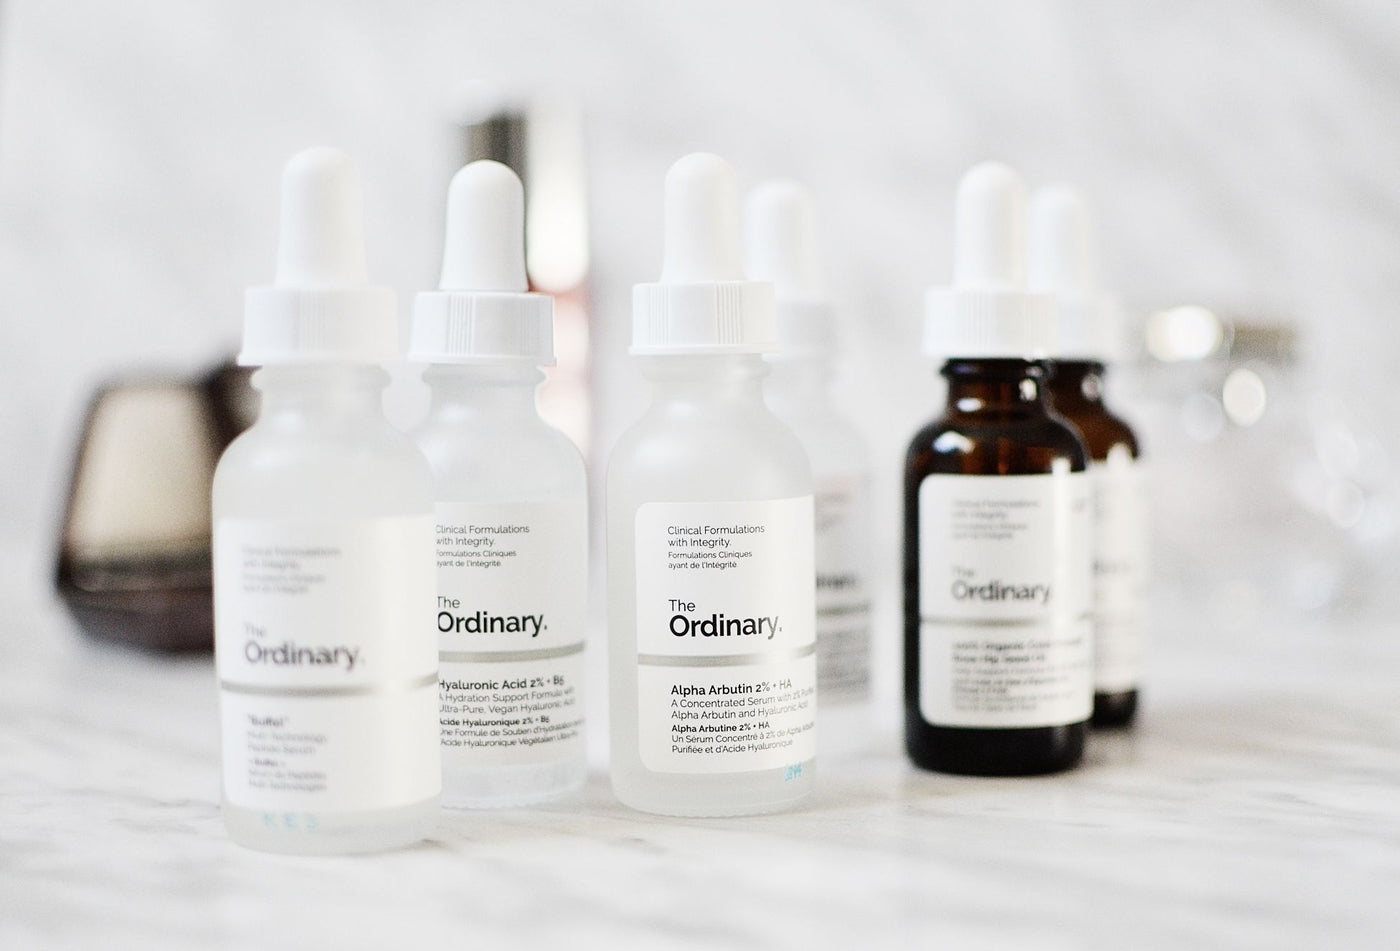 10 Best The Ordinary Products 2020